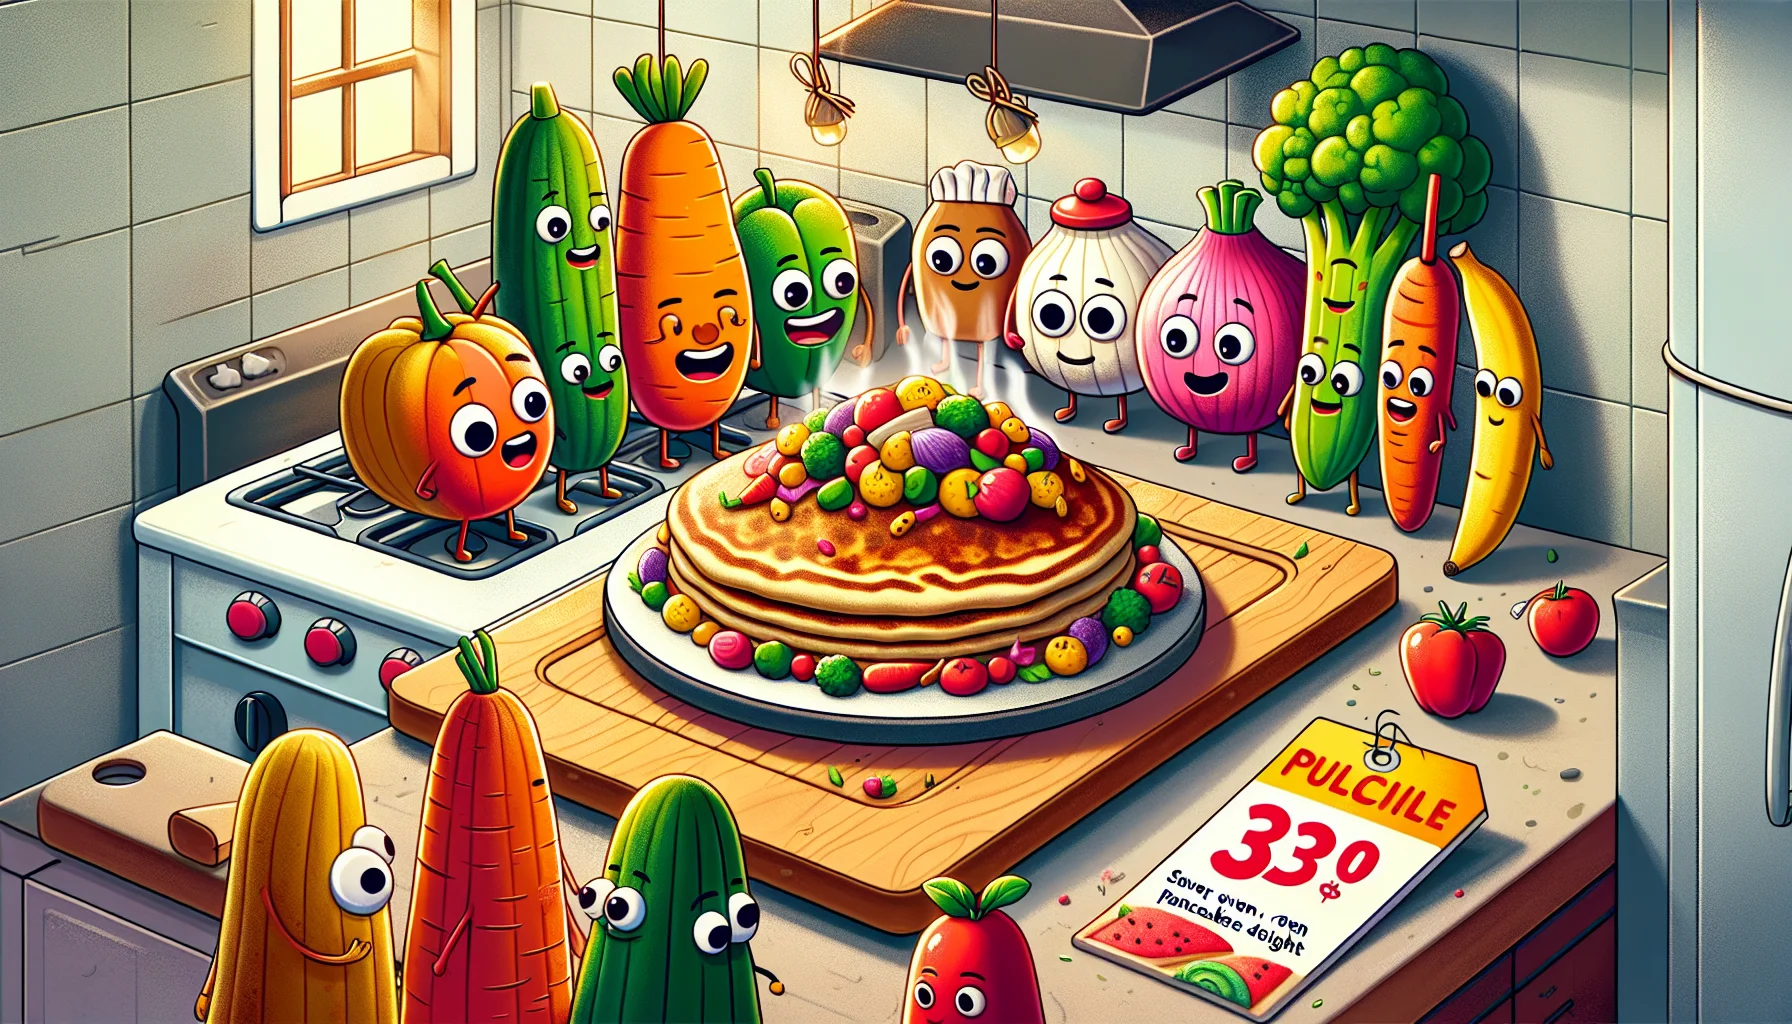 Illustrate an amusing yet relatable scenario depicting a 'Savory Oven Pancake Delight'. The pancake should be served on a stylish dish, adorned with a rainbow of colorful vegetables, giving a testament to its rich nutritional content. A group of animated food items from different food groups, all with quirky faces, are gathered around observing it with awe. These should appear to be engaged in a lively conversation, convincingly advocating for healthy eating. Off to the side, there's a price tag with a surprisingly low figure, demonstrating that good health doesn't always have to come at a high cost. The setting should be in a homely kitchen.